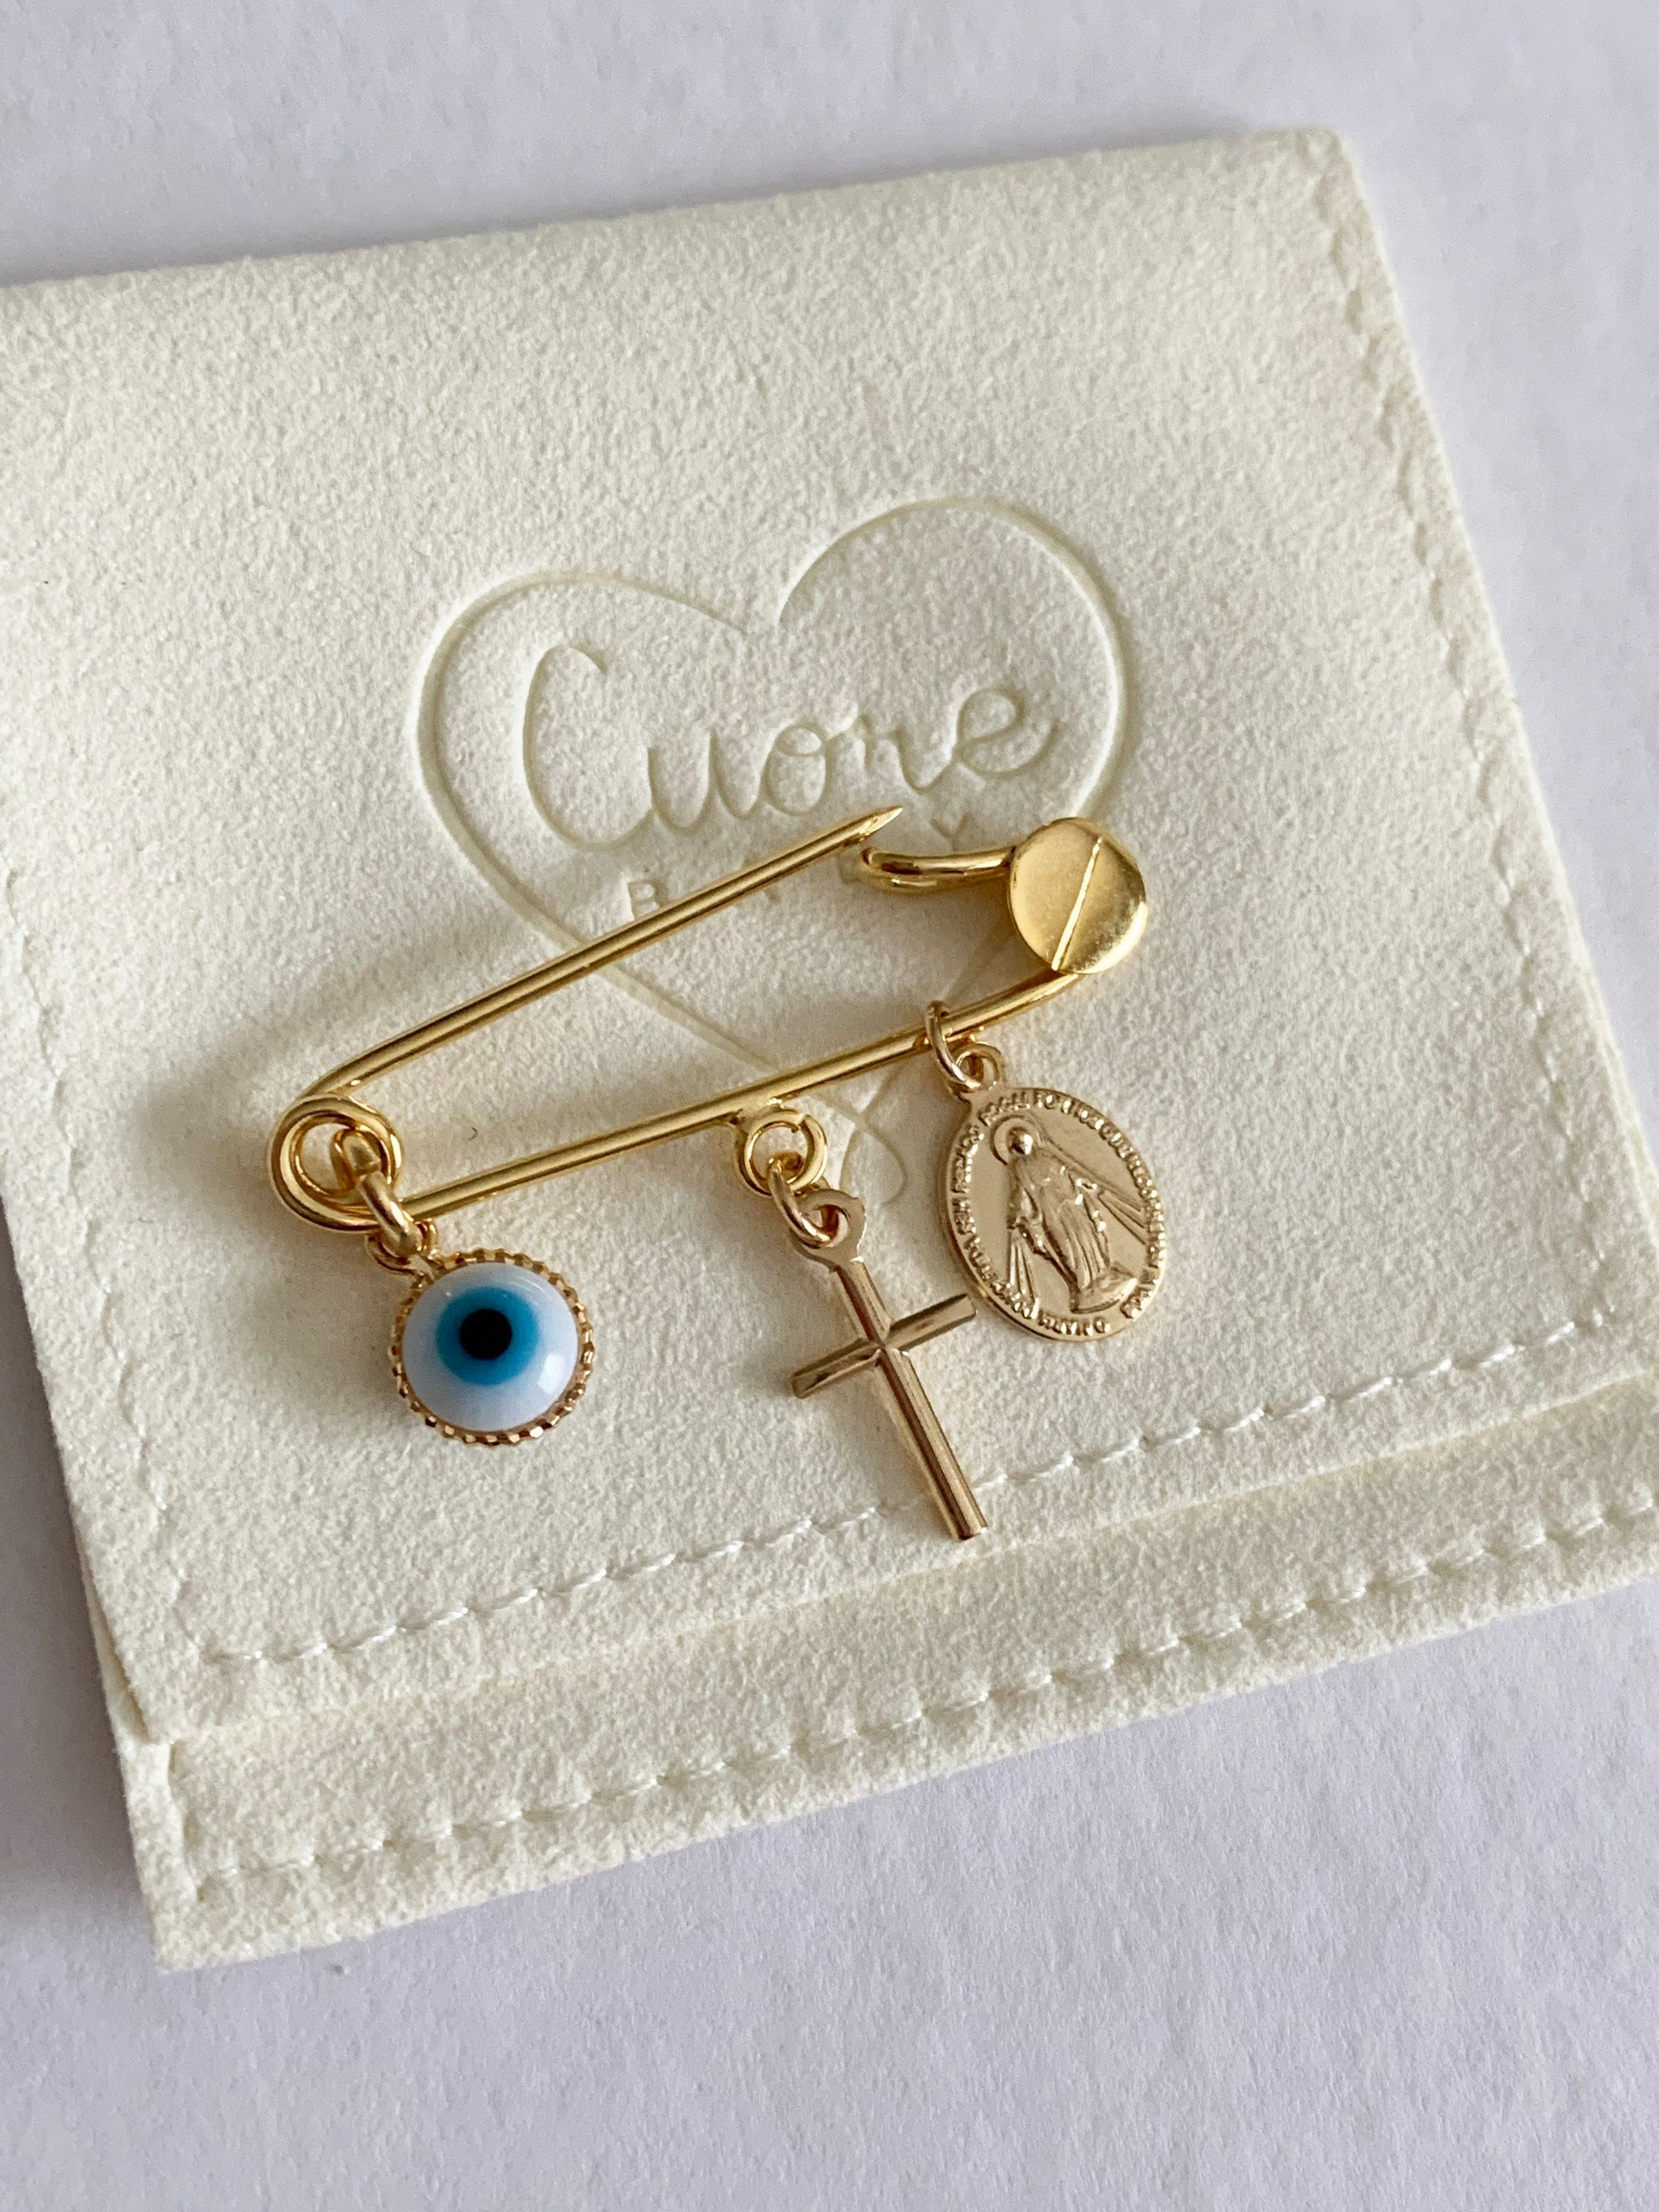 Baby Brooch Pin, Baby Safety Pin, Baby Evil Eye Jewelry, Newborn Gift, Baby  Shower Gift, Protection Amulet for Baby, Baby Jewelry, Baby Gift 